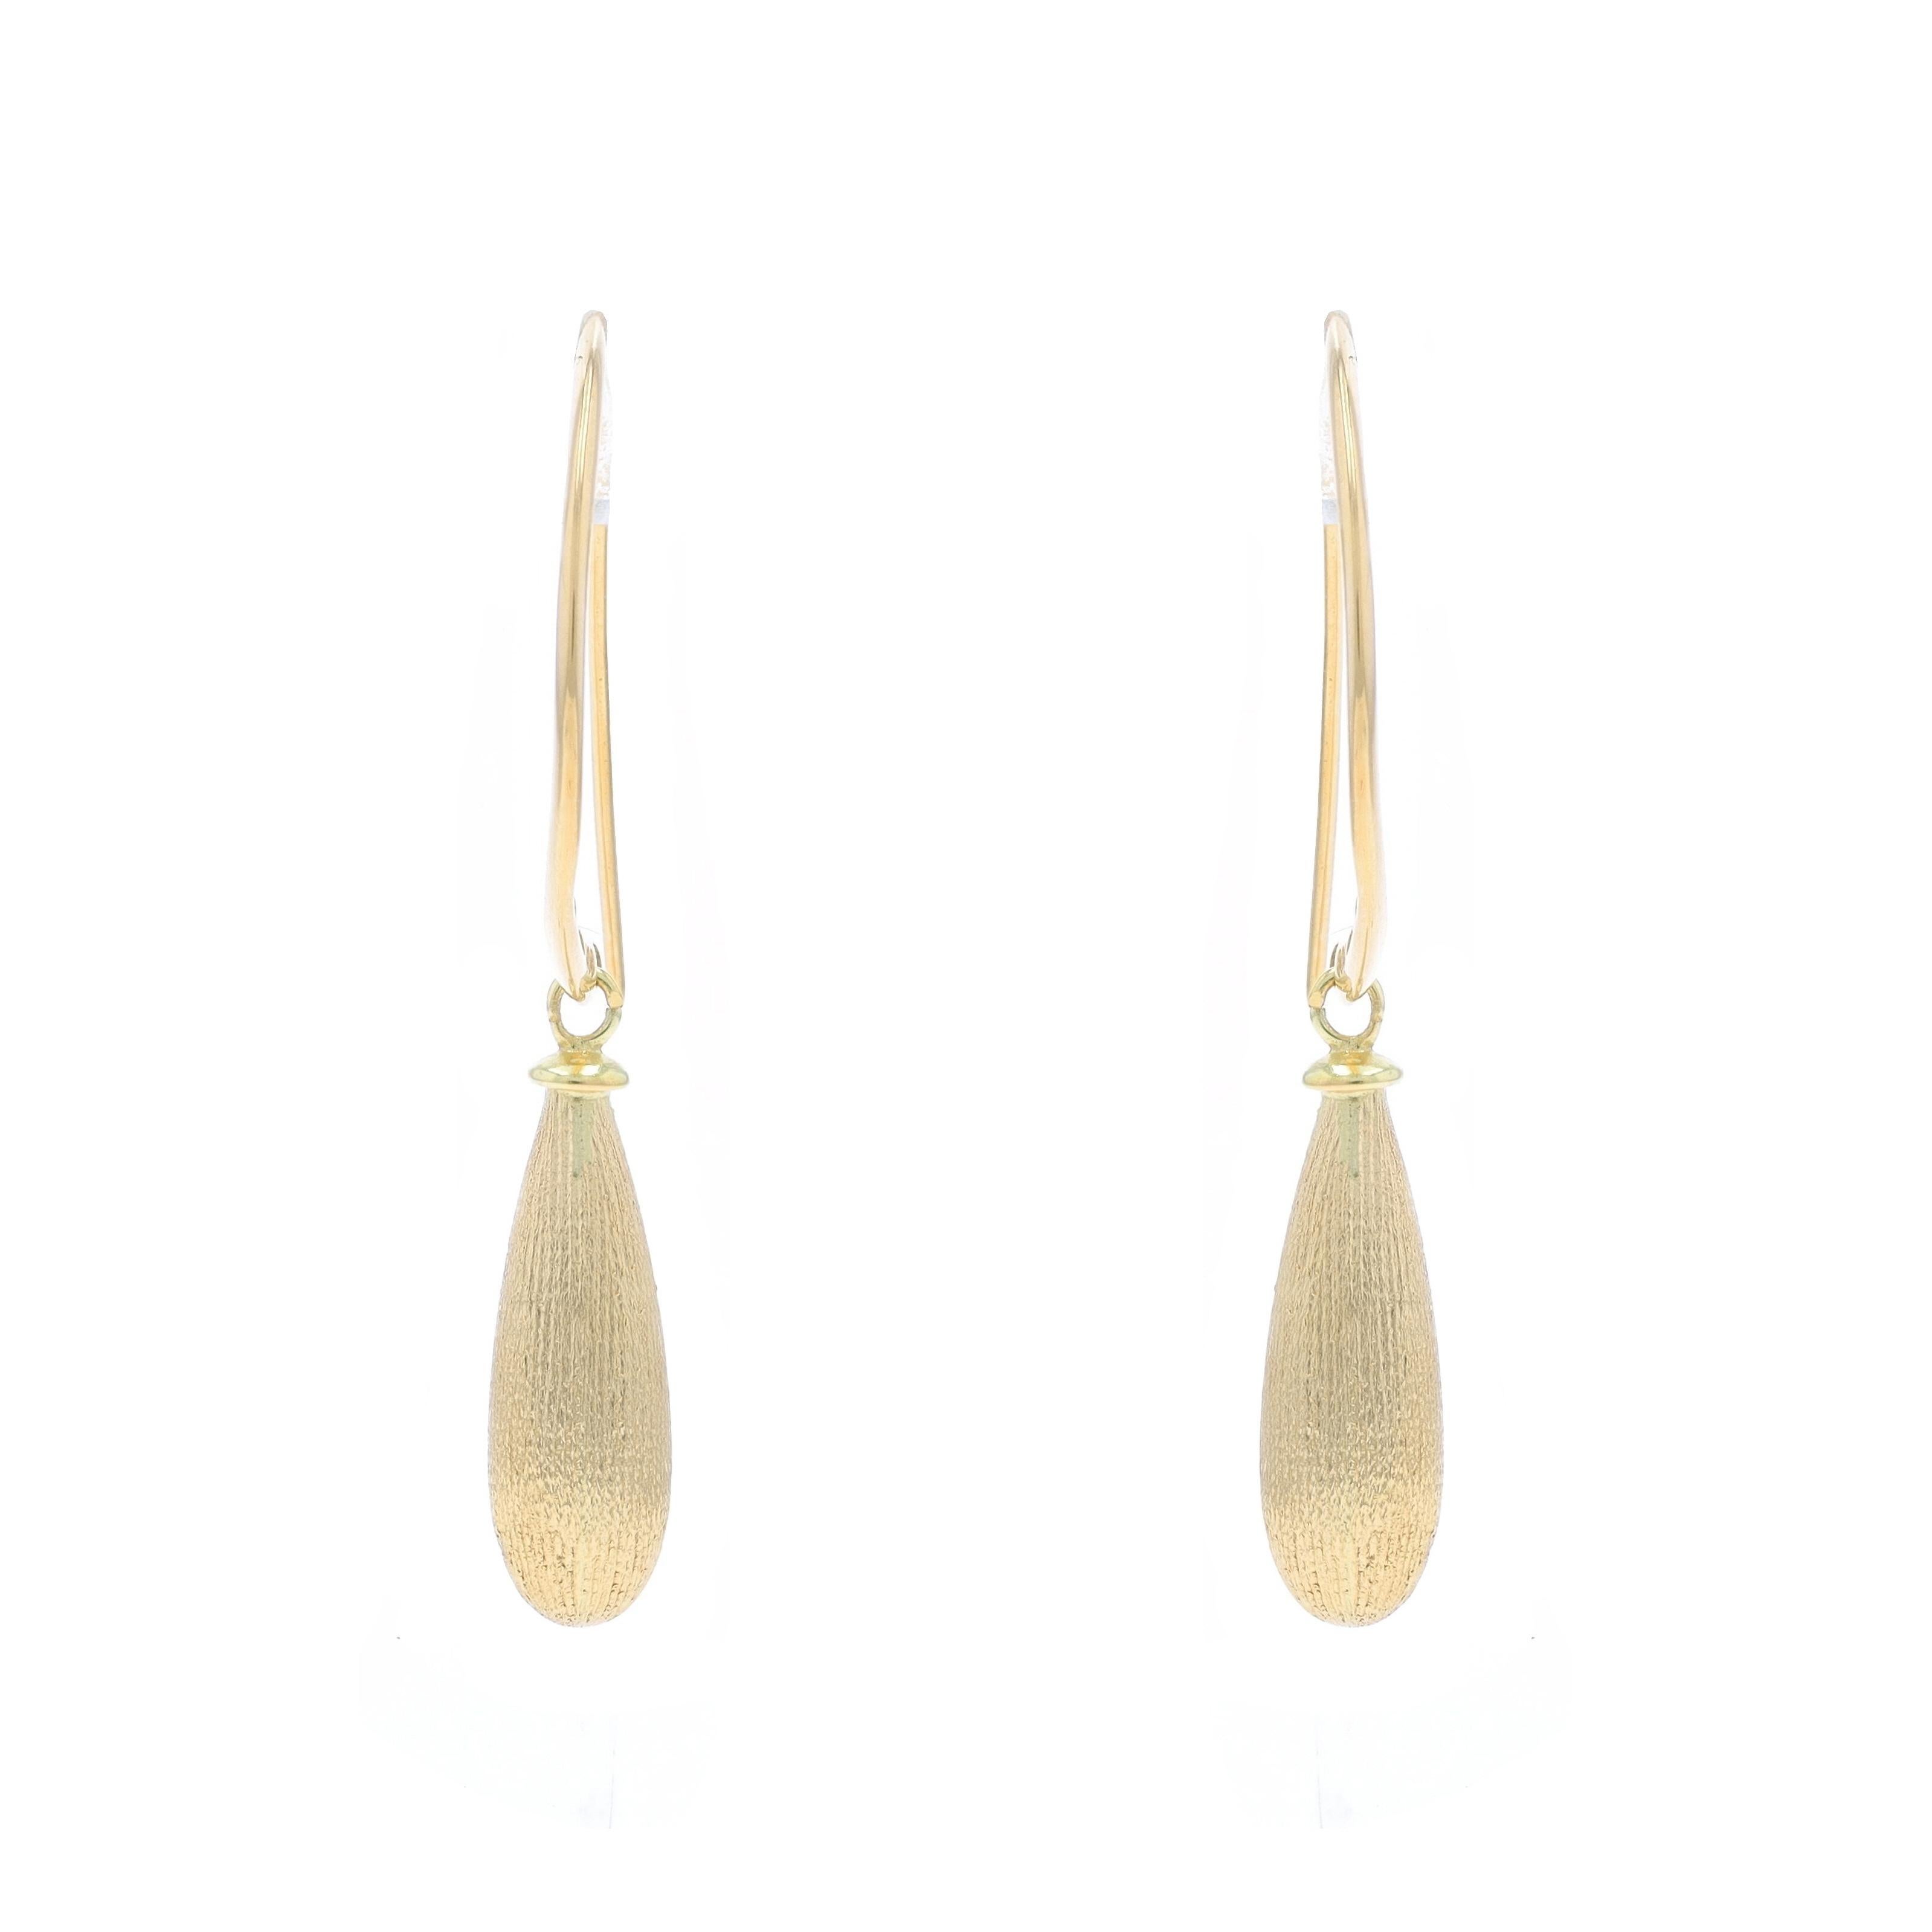 Brand: Milor

Metal Content: 18k Yellow Gold

Style: Dangle
Fastening Type: Hook Closures
Theme: Teardrop
Features: Smoothly Finished with Brushed Detailing on Hollow Dangles

Measurements

Tall: 1 1/2